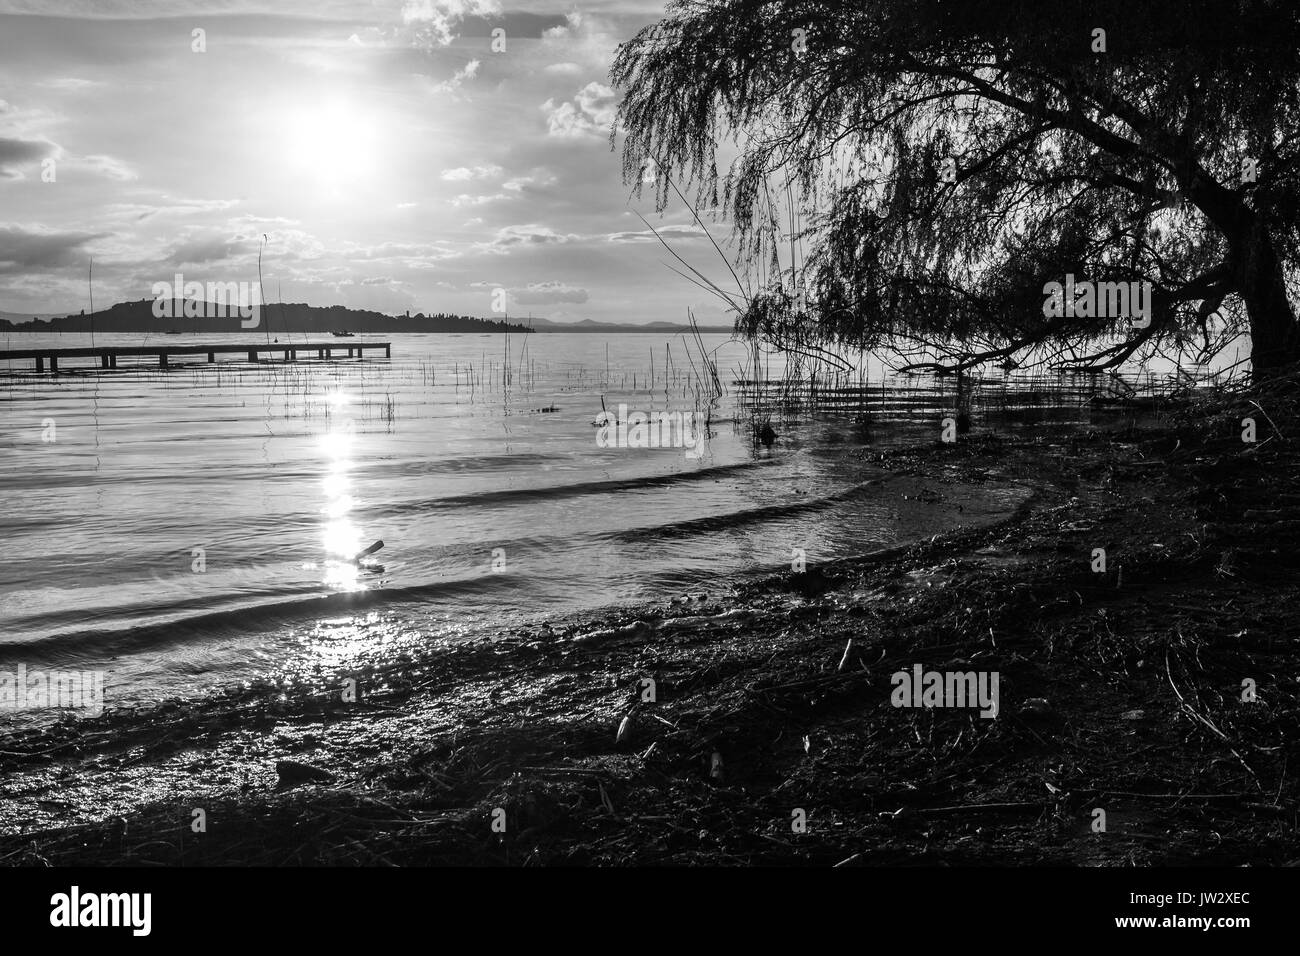 A lake shore at sunset, with sun low on the horizon and a tree in the foreground Stock Photo